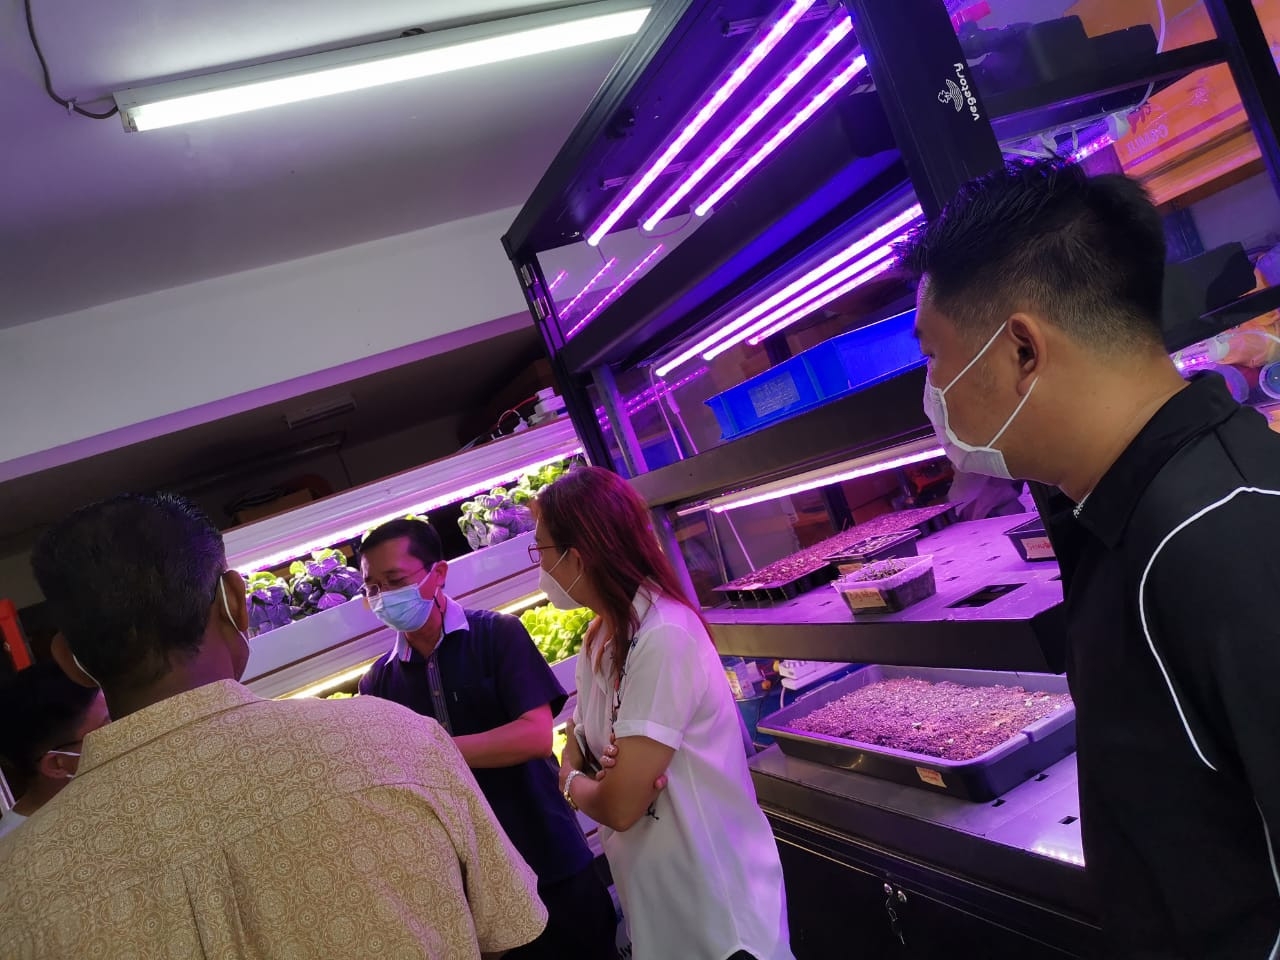 Regaltech’s Aquaponics Farm visited by Members of Parliament and Others